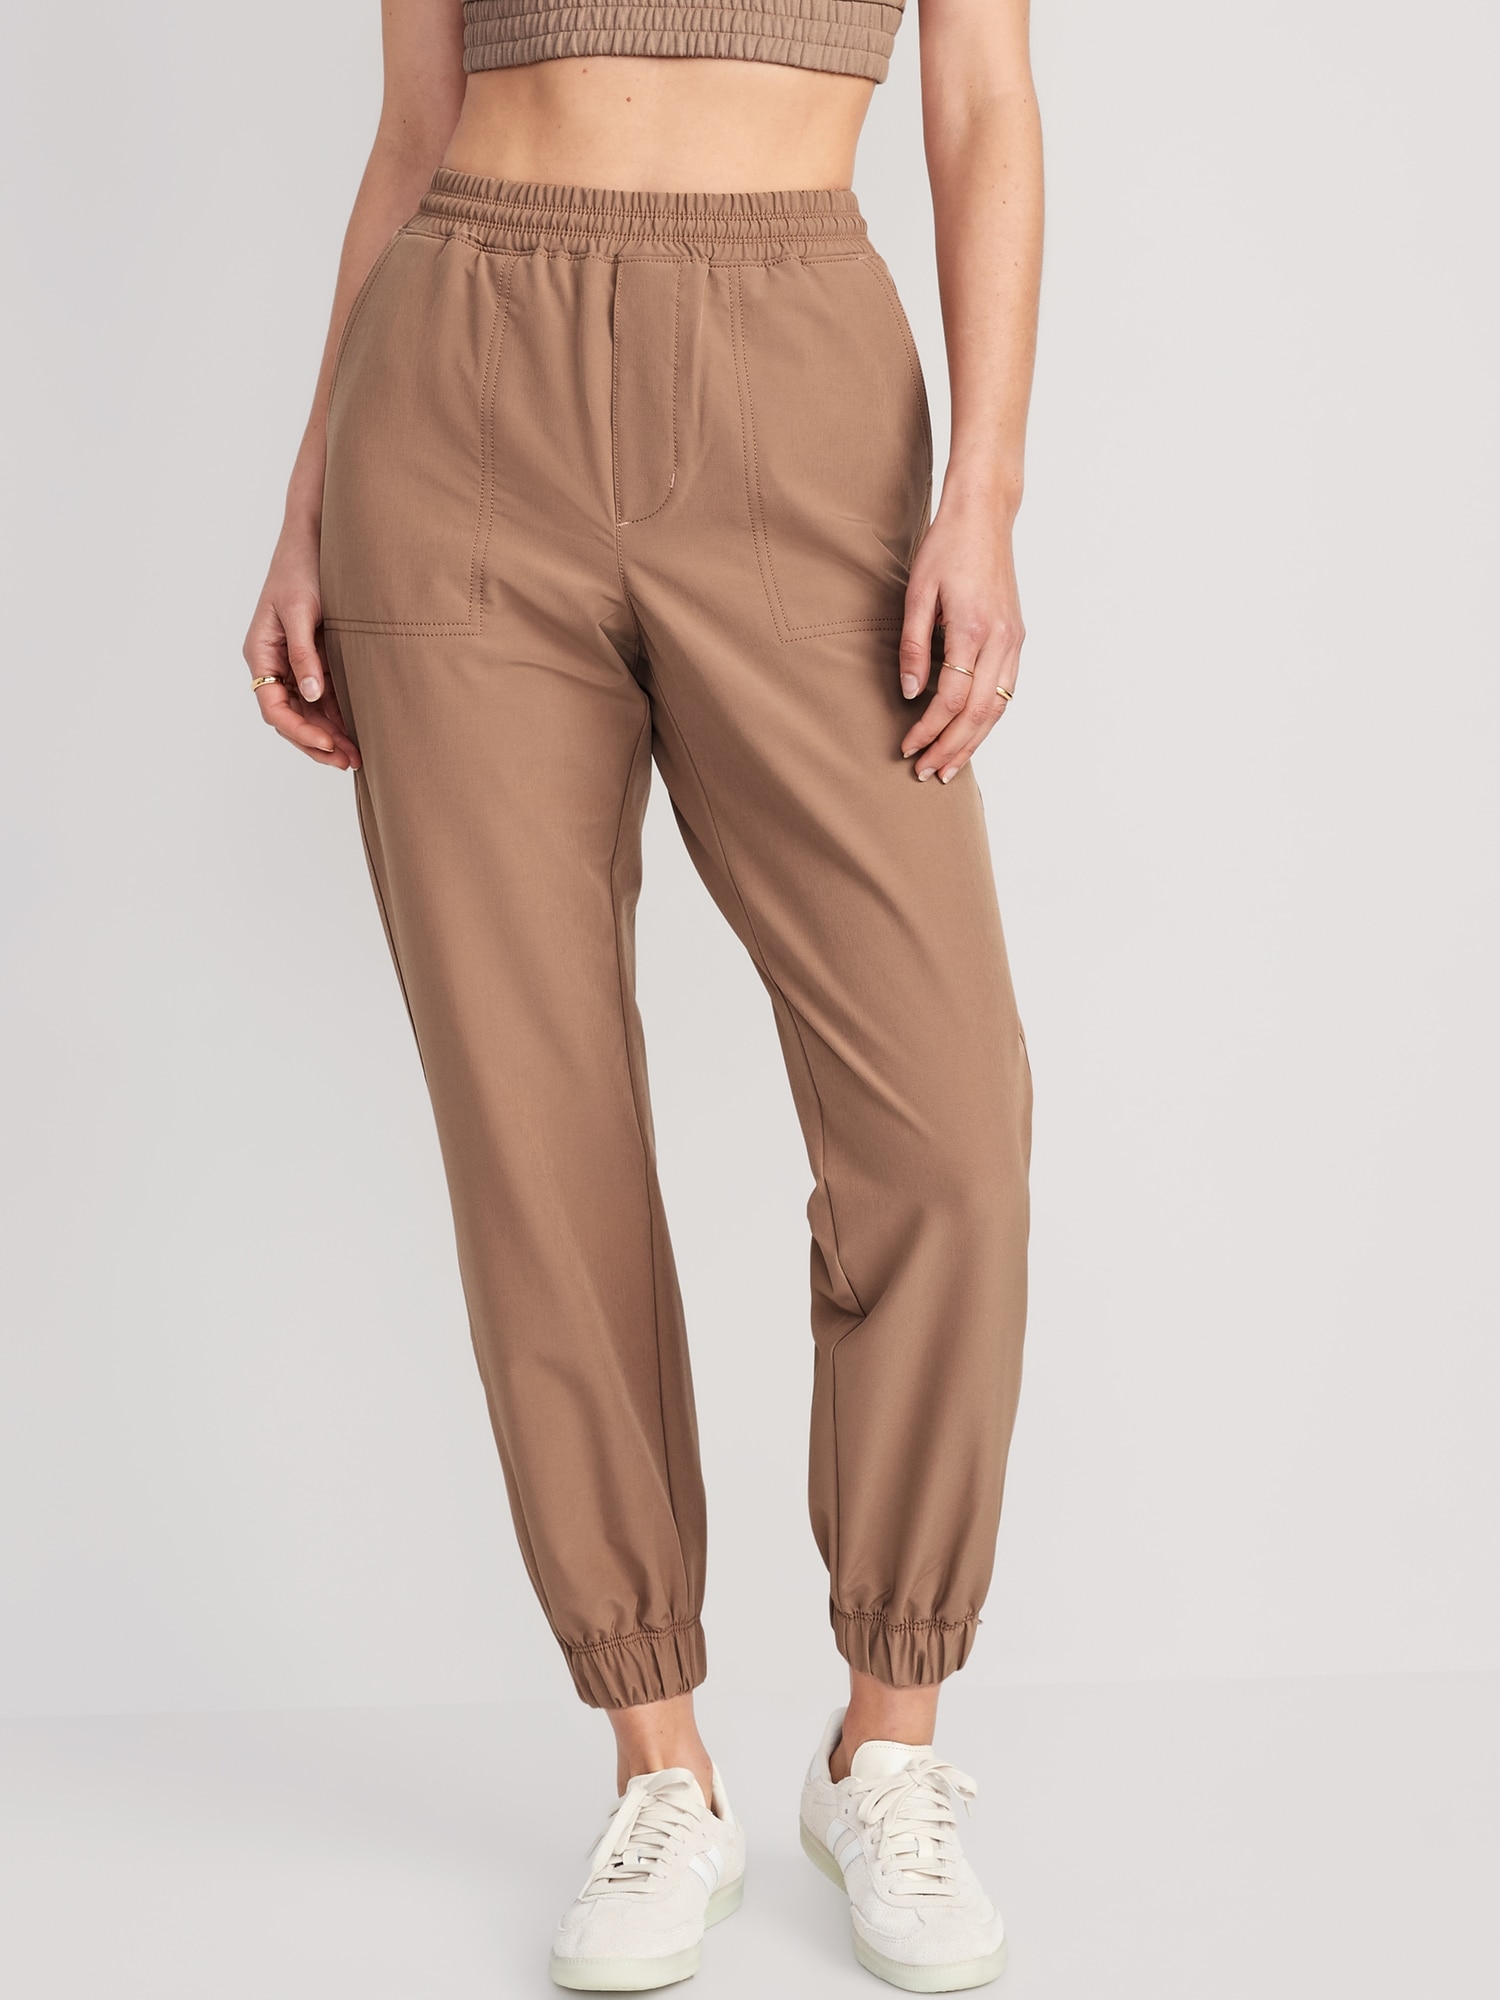 Old Navy High-Waisted All-Seasons StretchTech Water-Repellent Jogger Pants for Women beige. 1